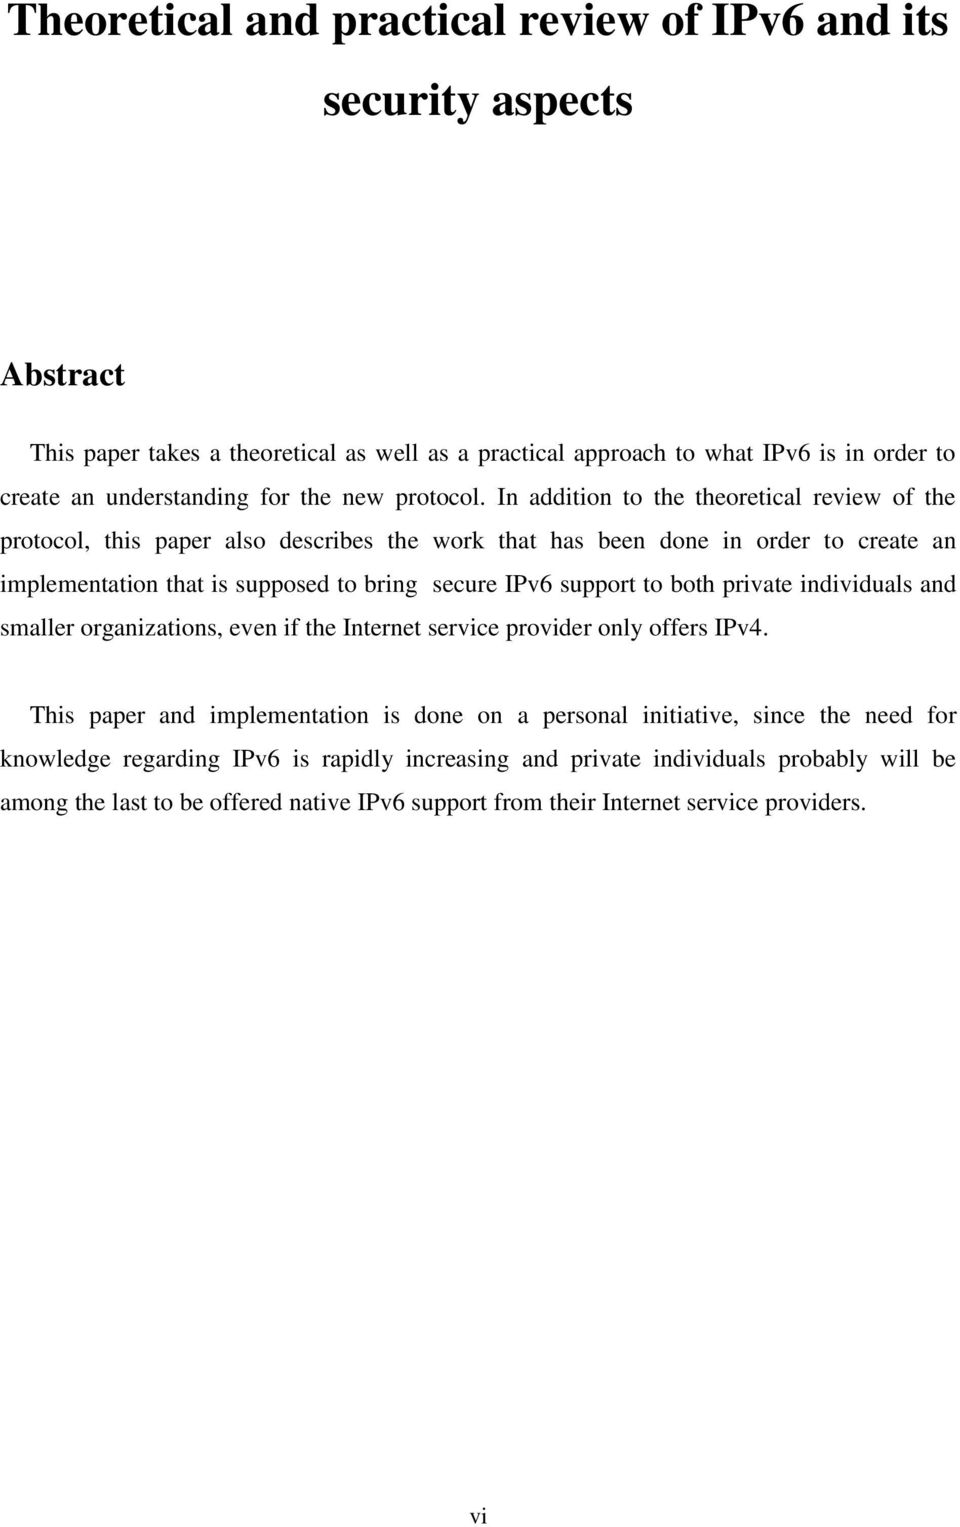 In addition to the theoretical review of the protocol, this paper also describes the work that has been done in order to create an implementation that is supposed to bring secure IPv6 support